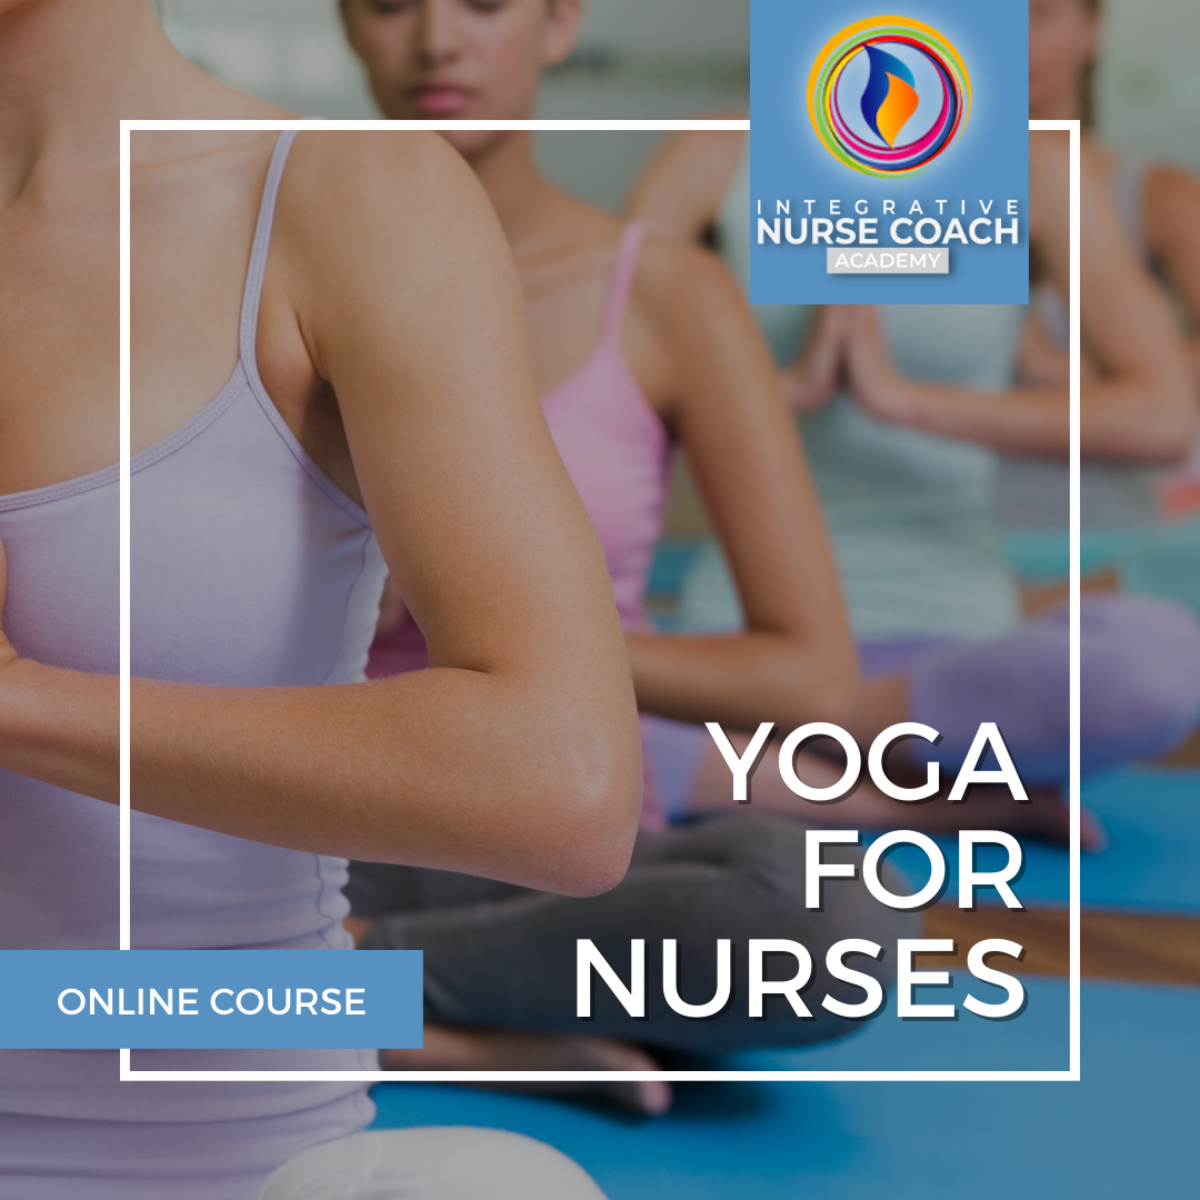 Yoga Nurse Medical Yoga Therapy and Stress Relief - I would LOVE to get  your feedback on this! Being holistic nurses, what challenges do you face  with integrating yoga into your workplace?